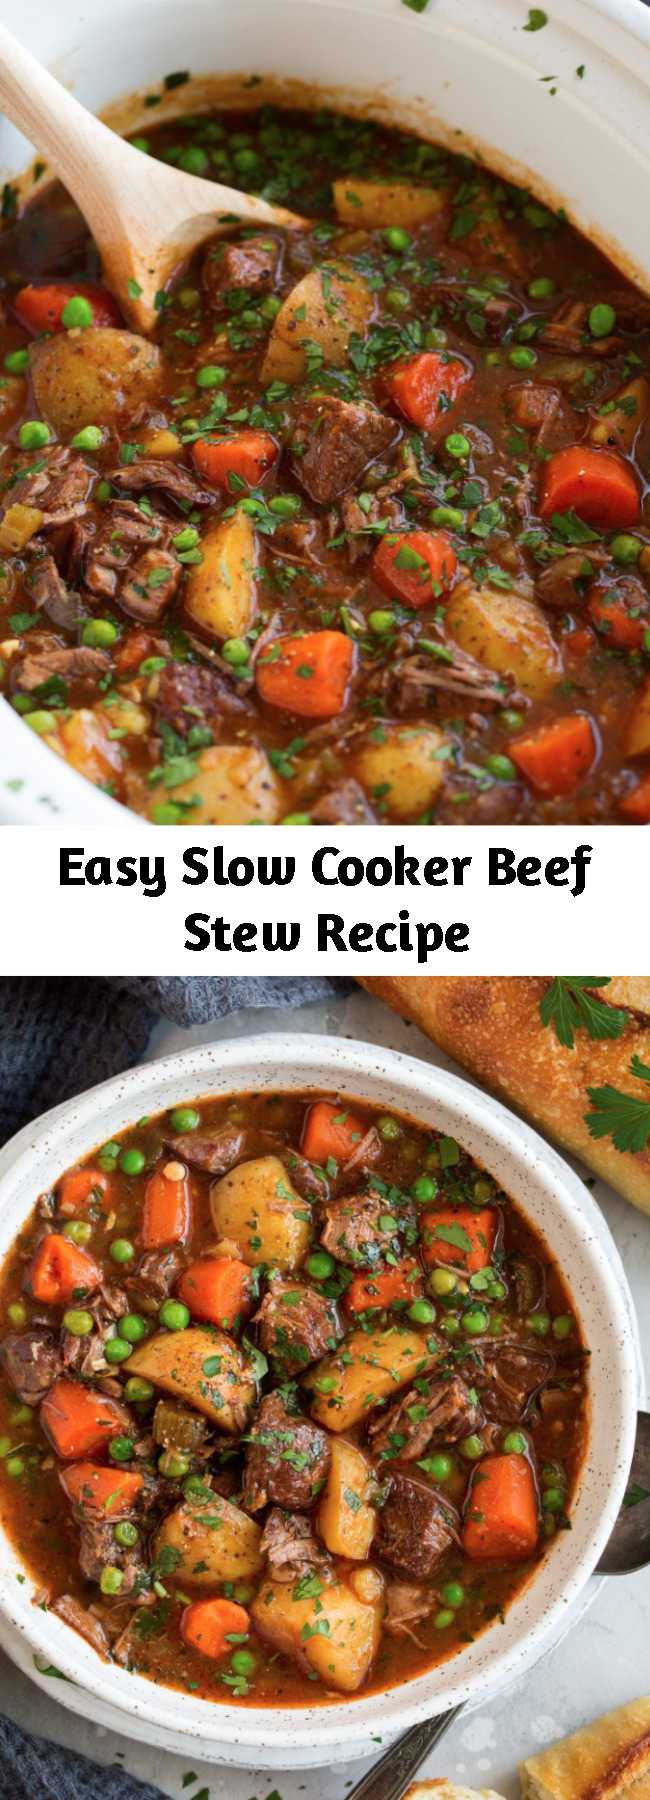 Easy Slow Cooker Beef Stew Recipe - This beef stew is the definition of comfort food! It is packed with flavor and that low and slow cooking yields the most tender beef. A staple recipe! Perfect cozy comfort food! #beefstew #soup #crockpot #recipe